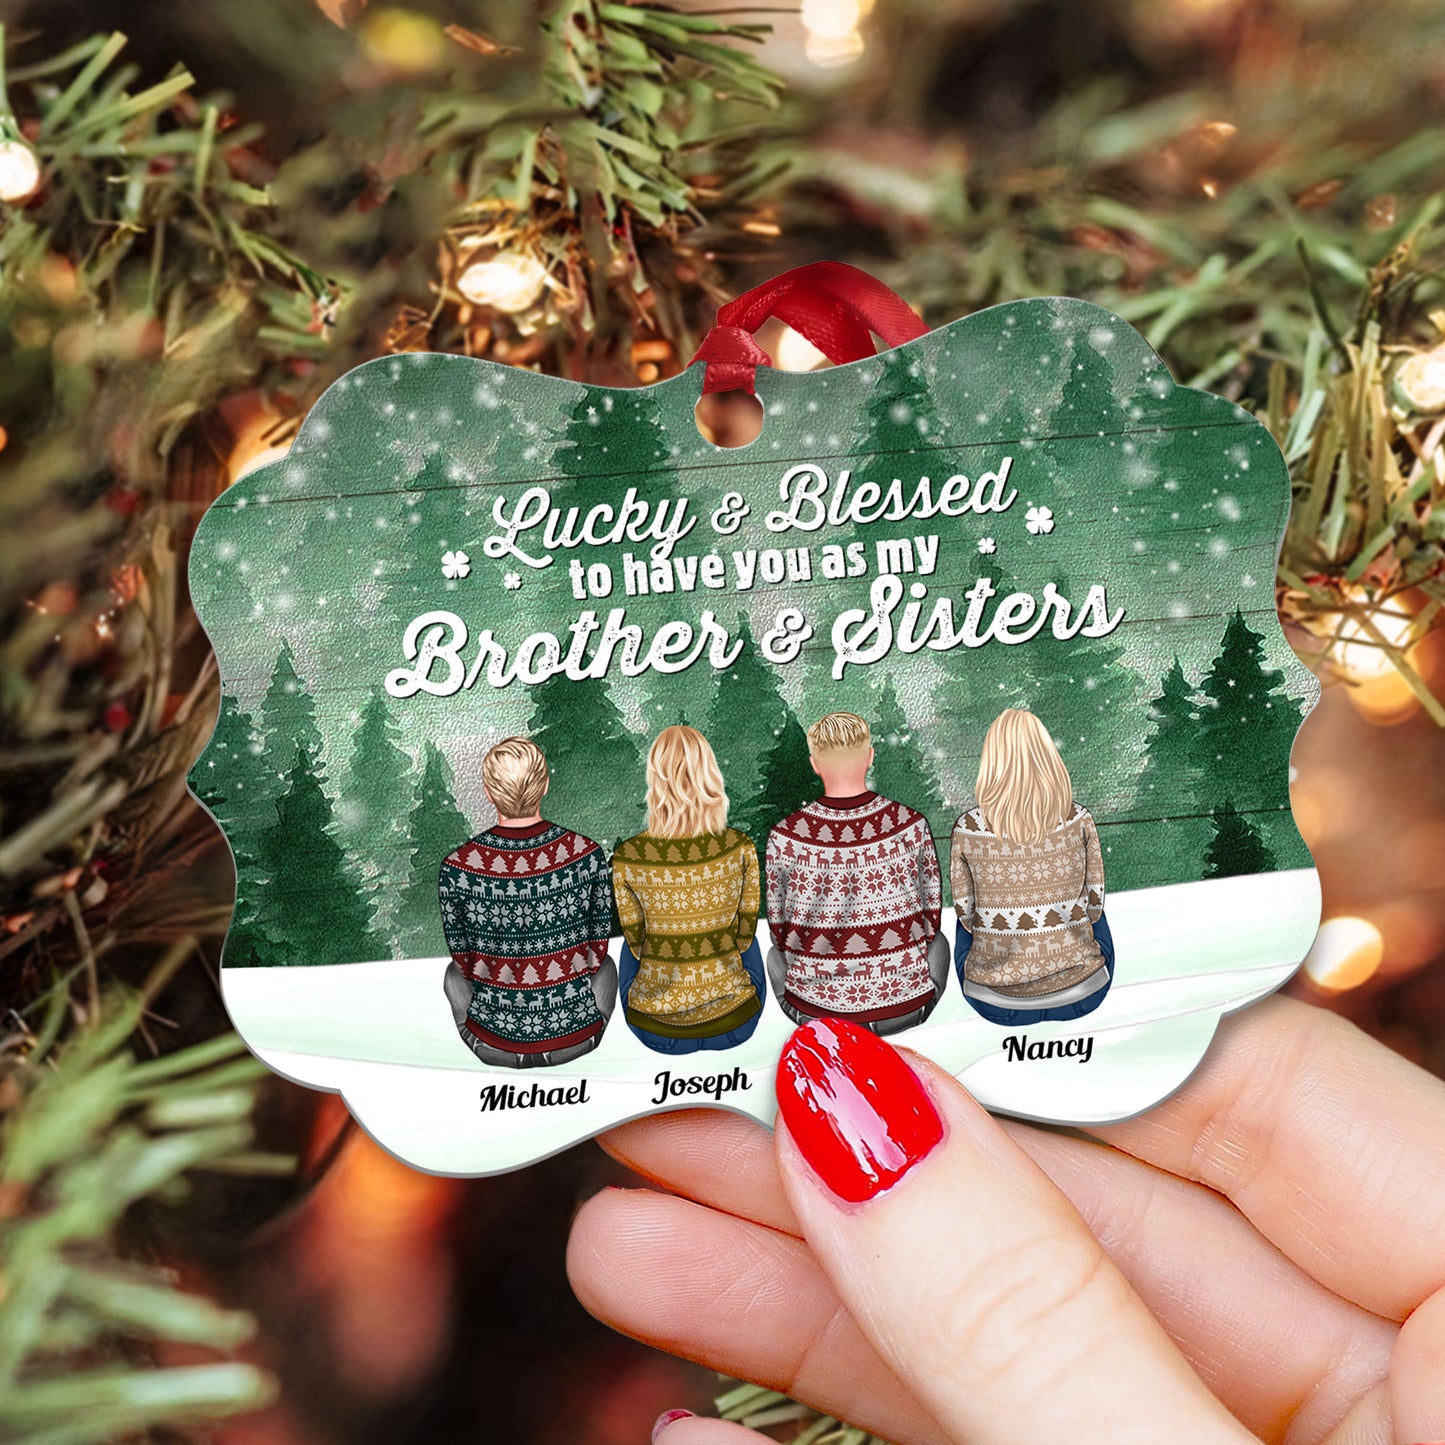 Lucky And Blessed To Have You As My Brothers & Sisters - Personalized Aluminum Ornament - Christmas Gift SIblings Ornament For Brothers, Sisters - Family Hugging